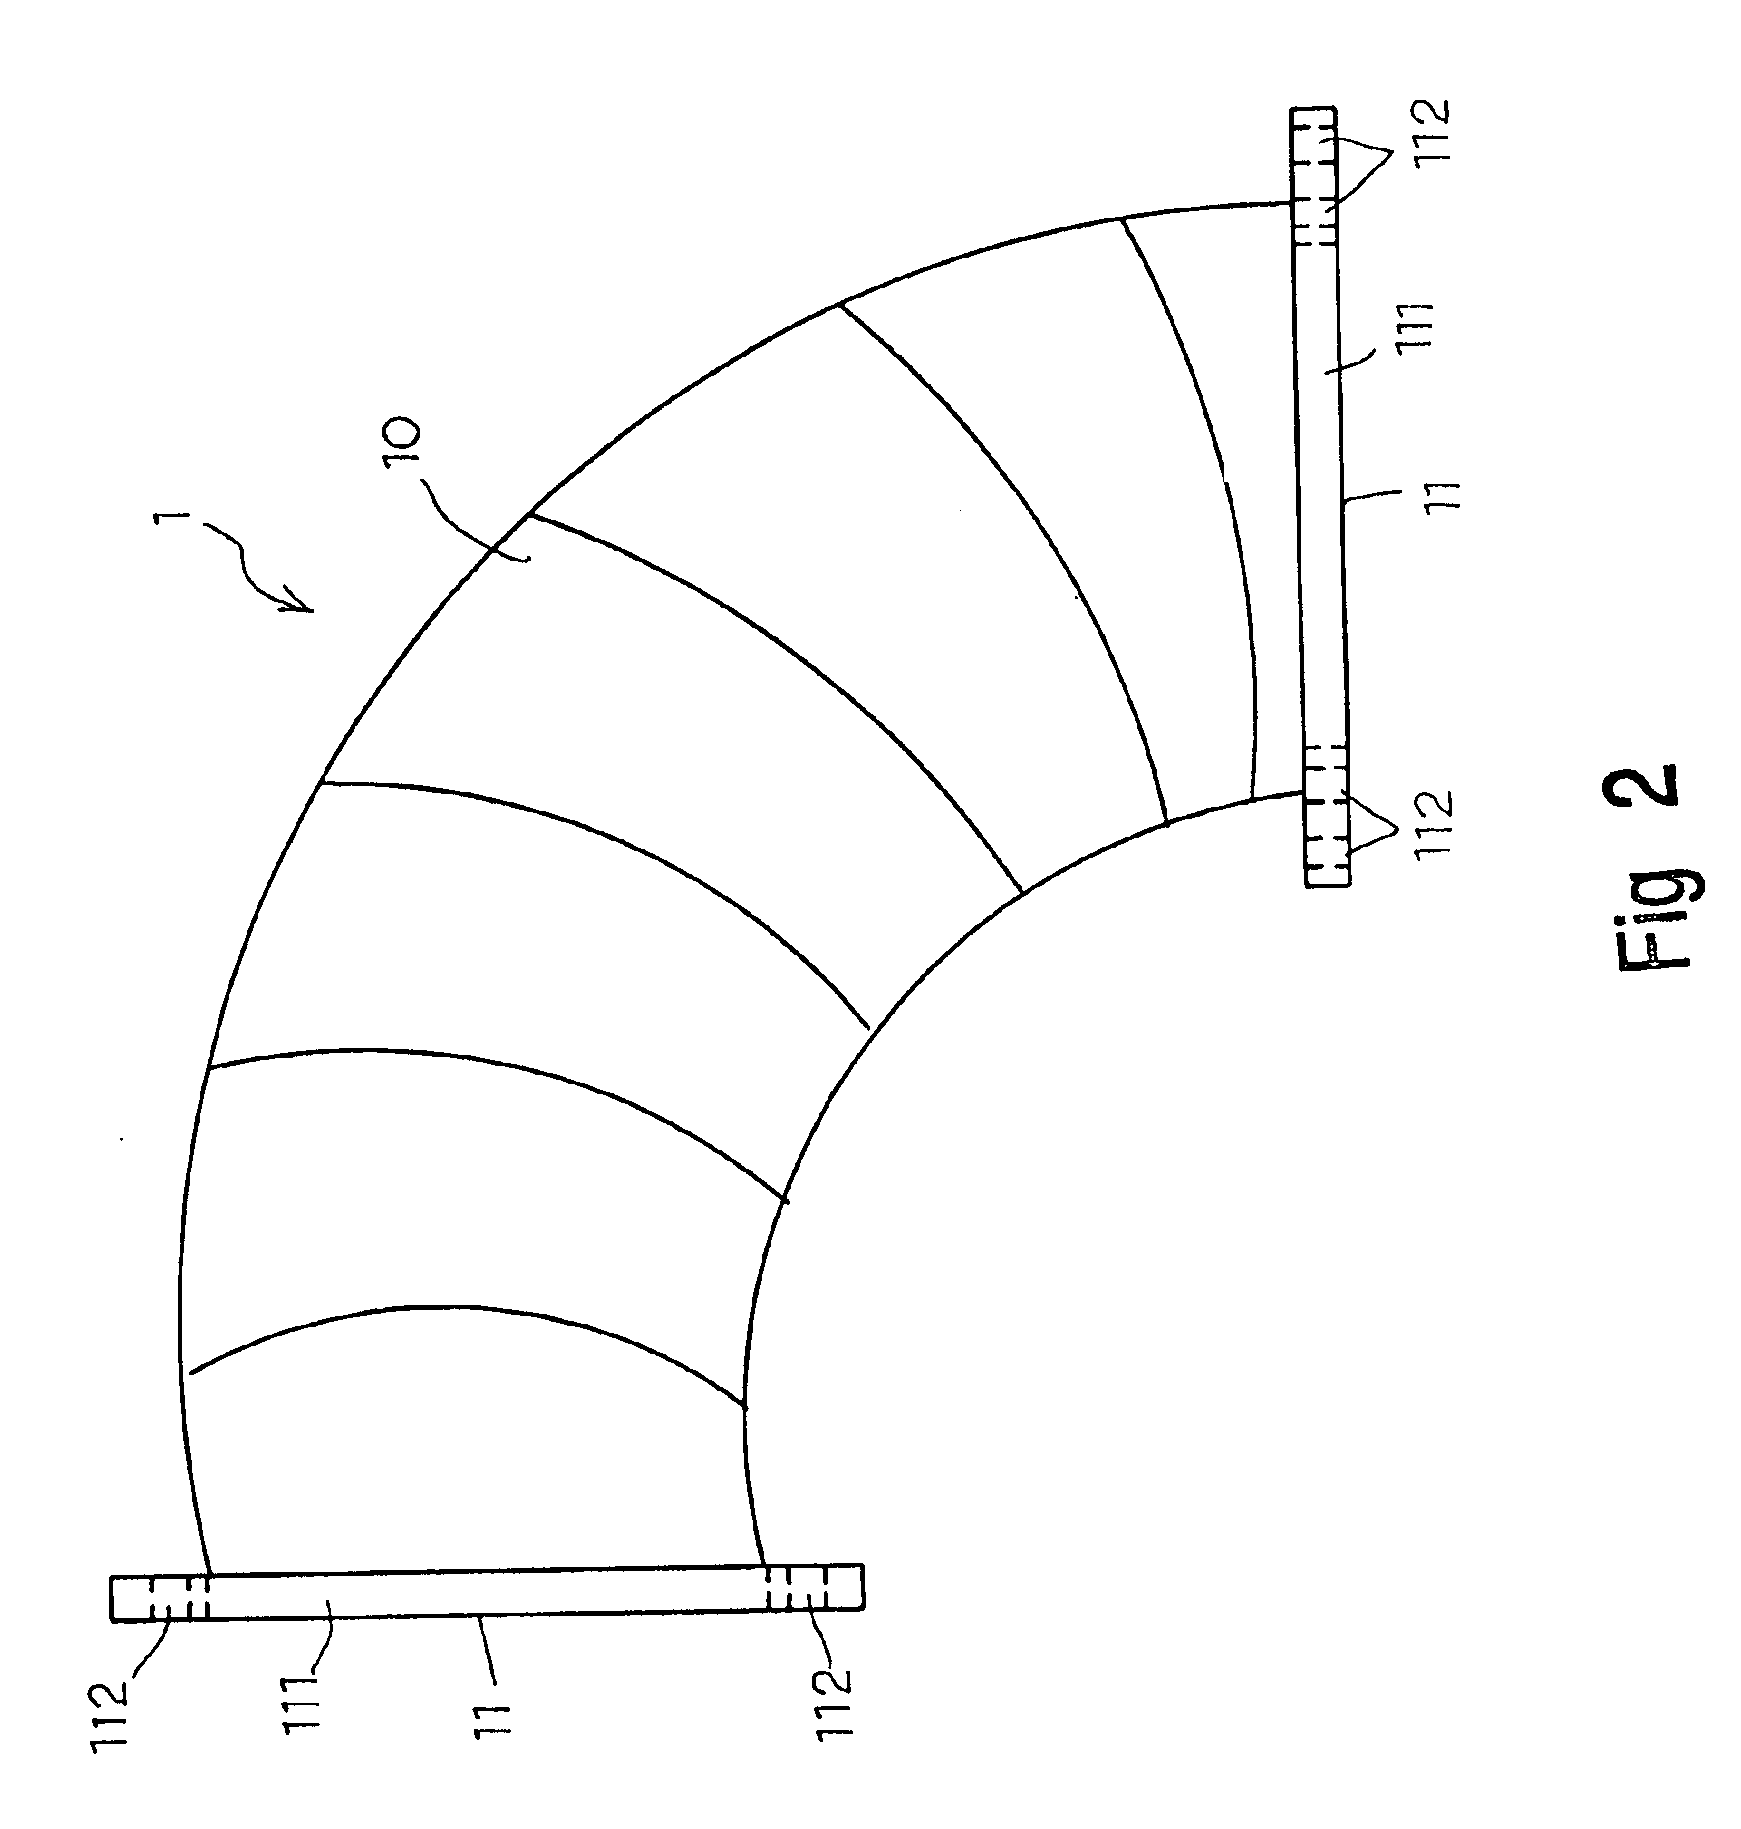 Extendible and flexible heat-dissipation air conduit base as computer heat dissipation device